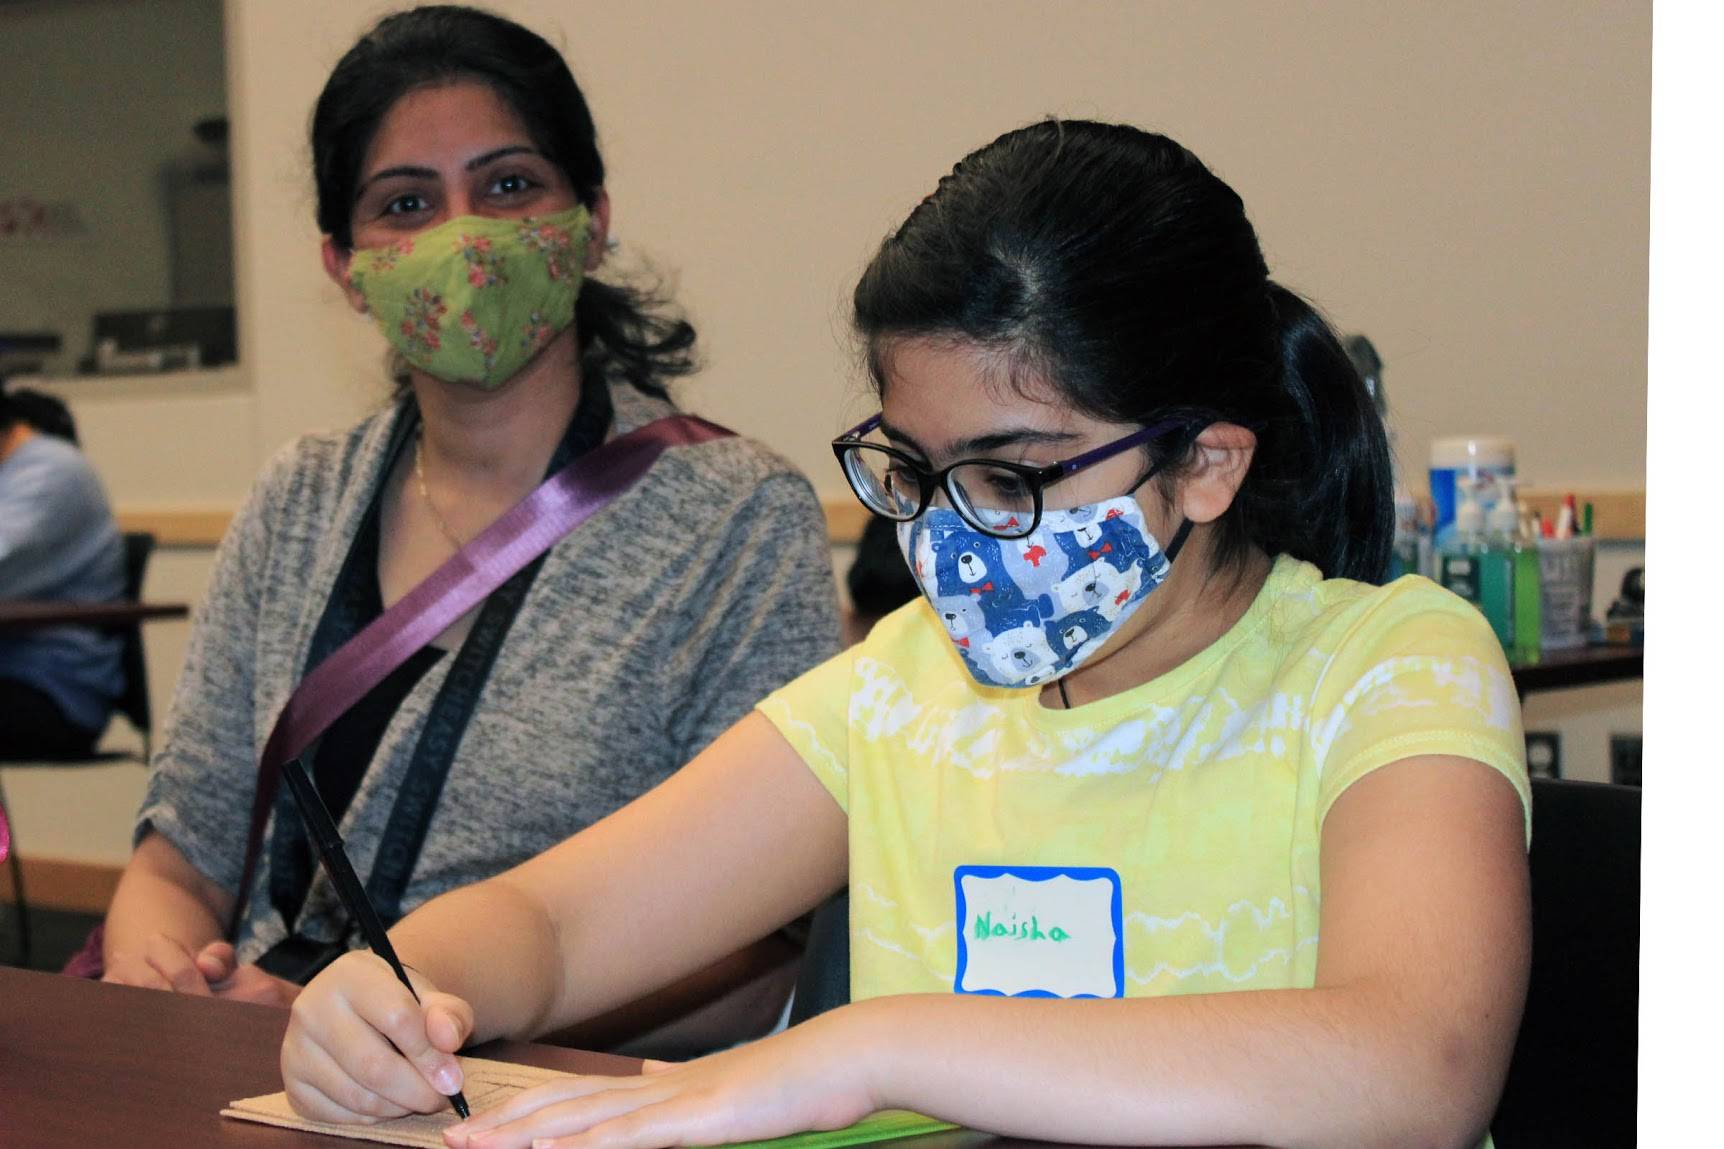 Naisha Bathija, 9, and her mother Neelam work on a Ravenstail pattern beading project at the Alaska State Library, Archives and Museum on June 26, 2021. (Dana Zigmund/Juneau Empire)